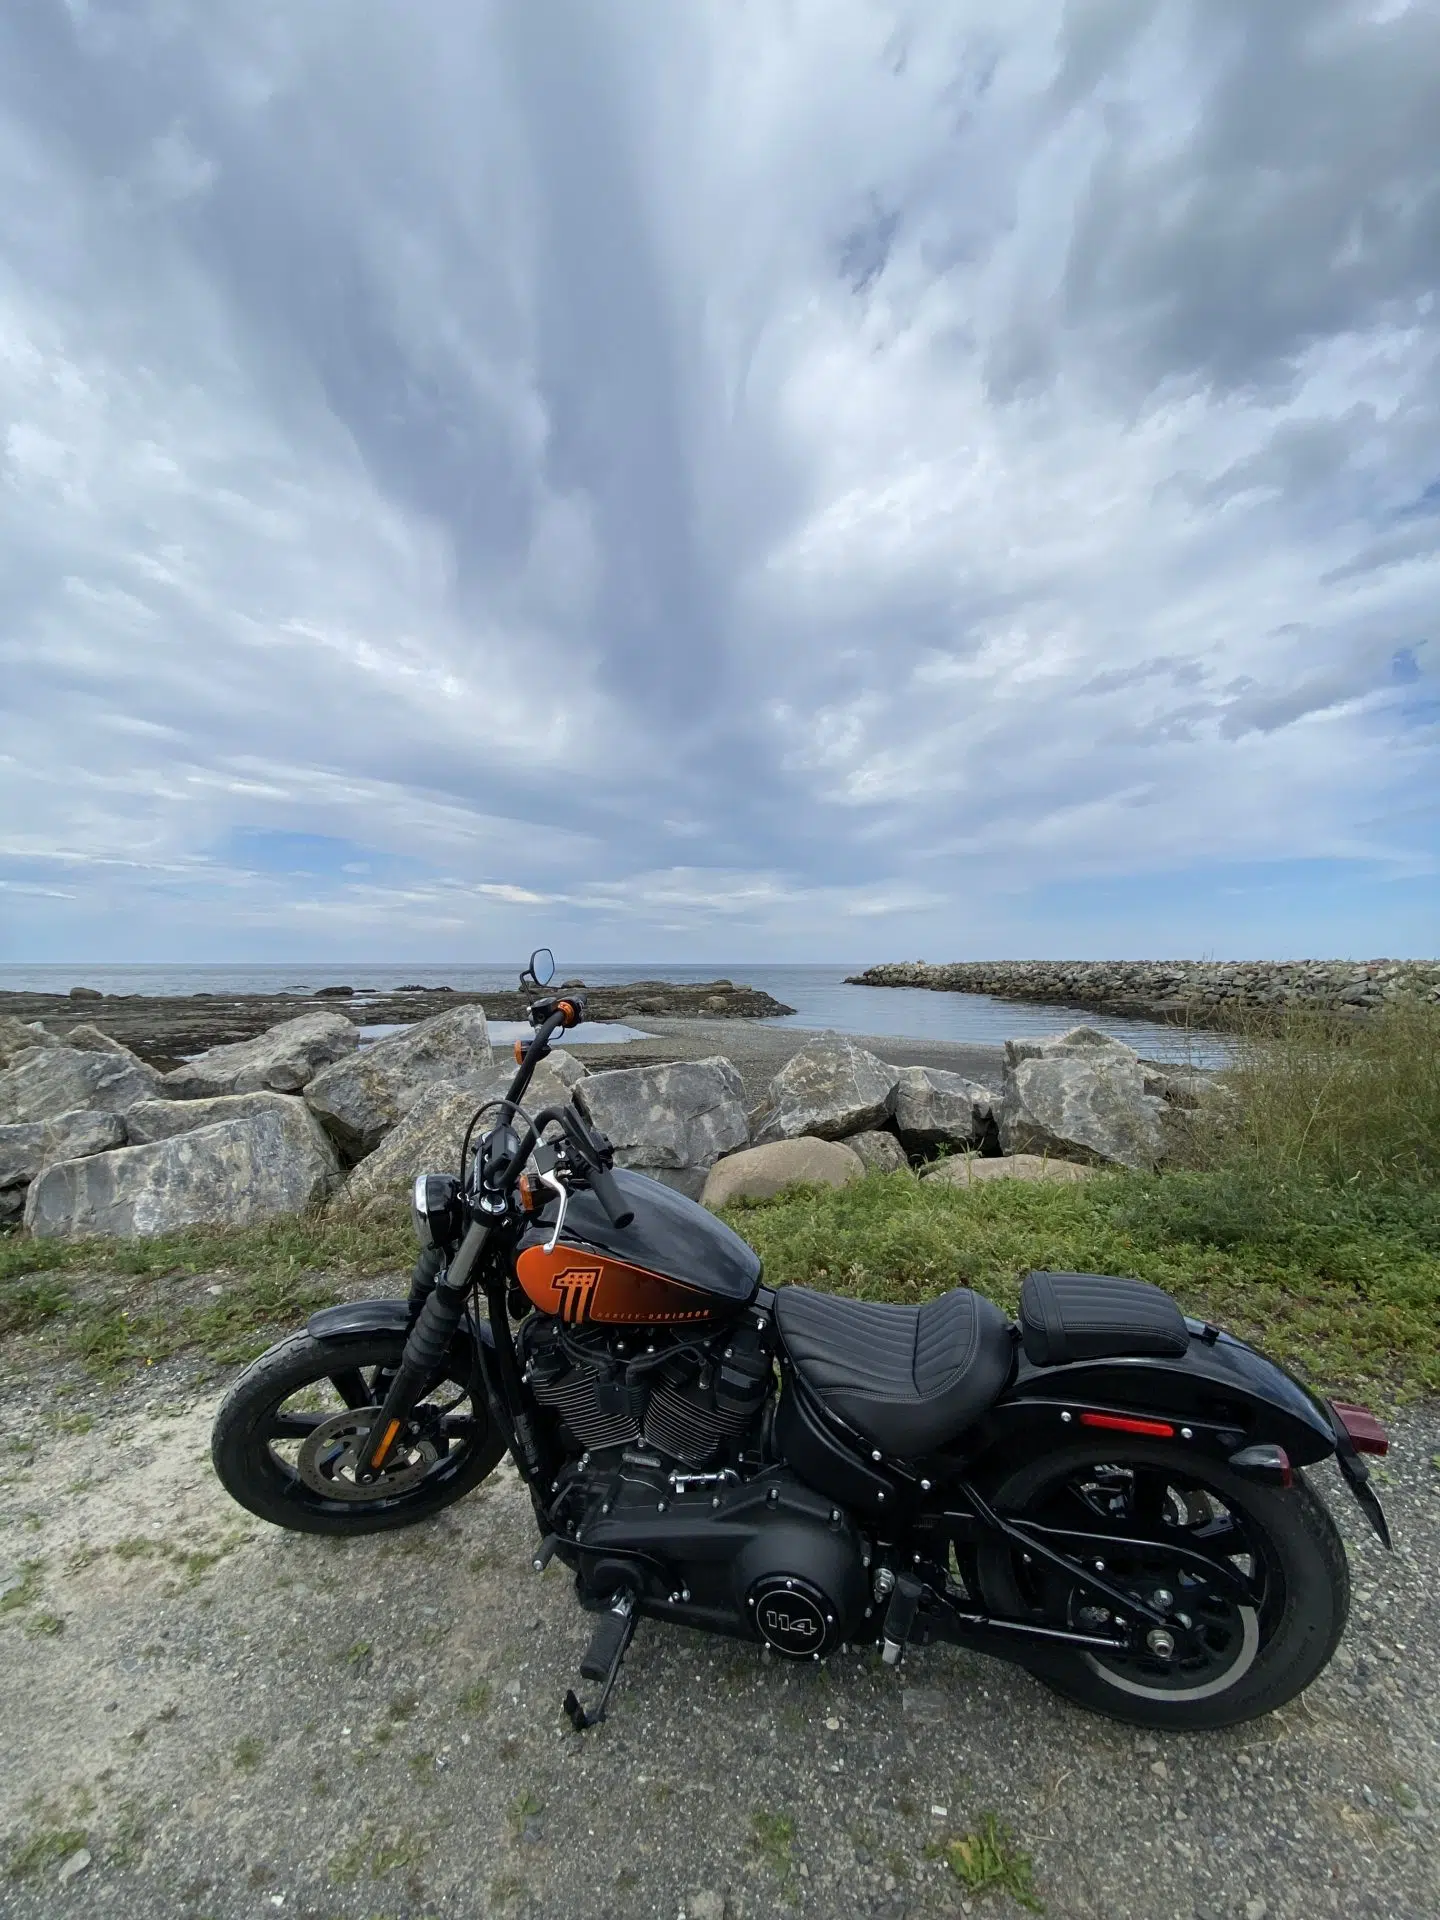 I've driven the StreetBob to a multitude of places